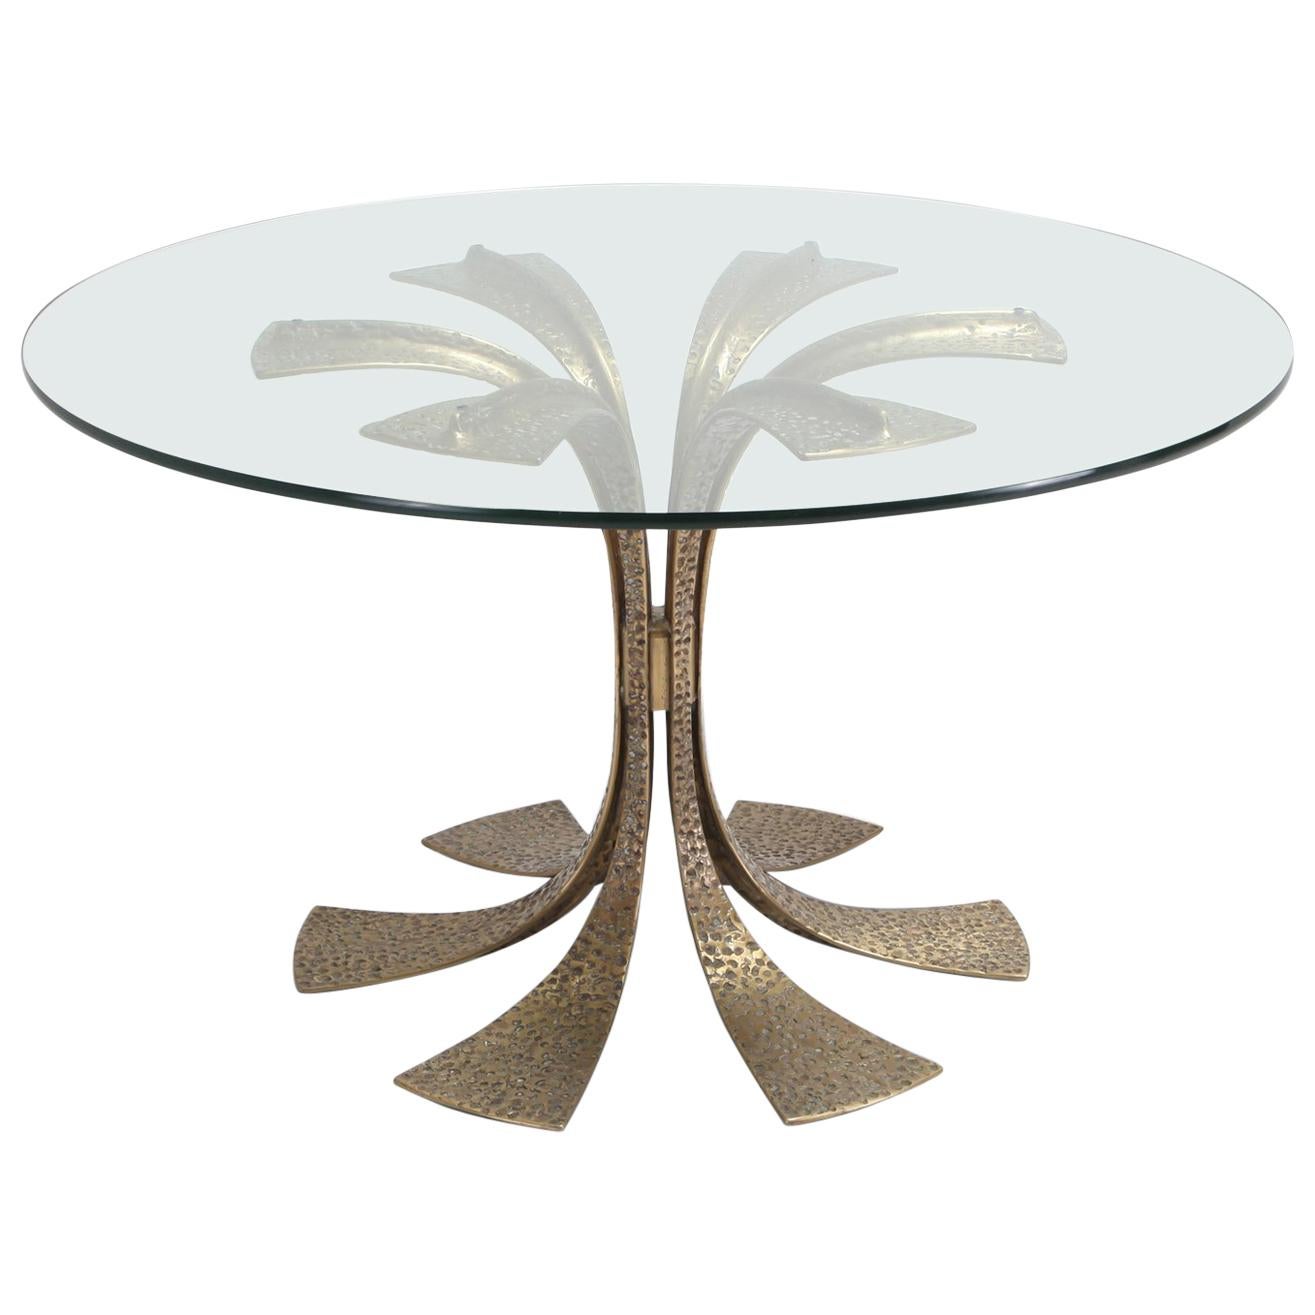 Hollywood Regency Hammered Brass Dining Table by Luciano Frigerio